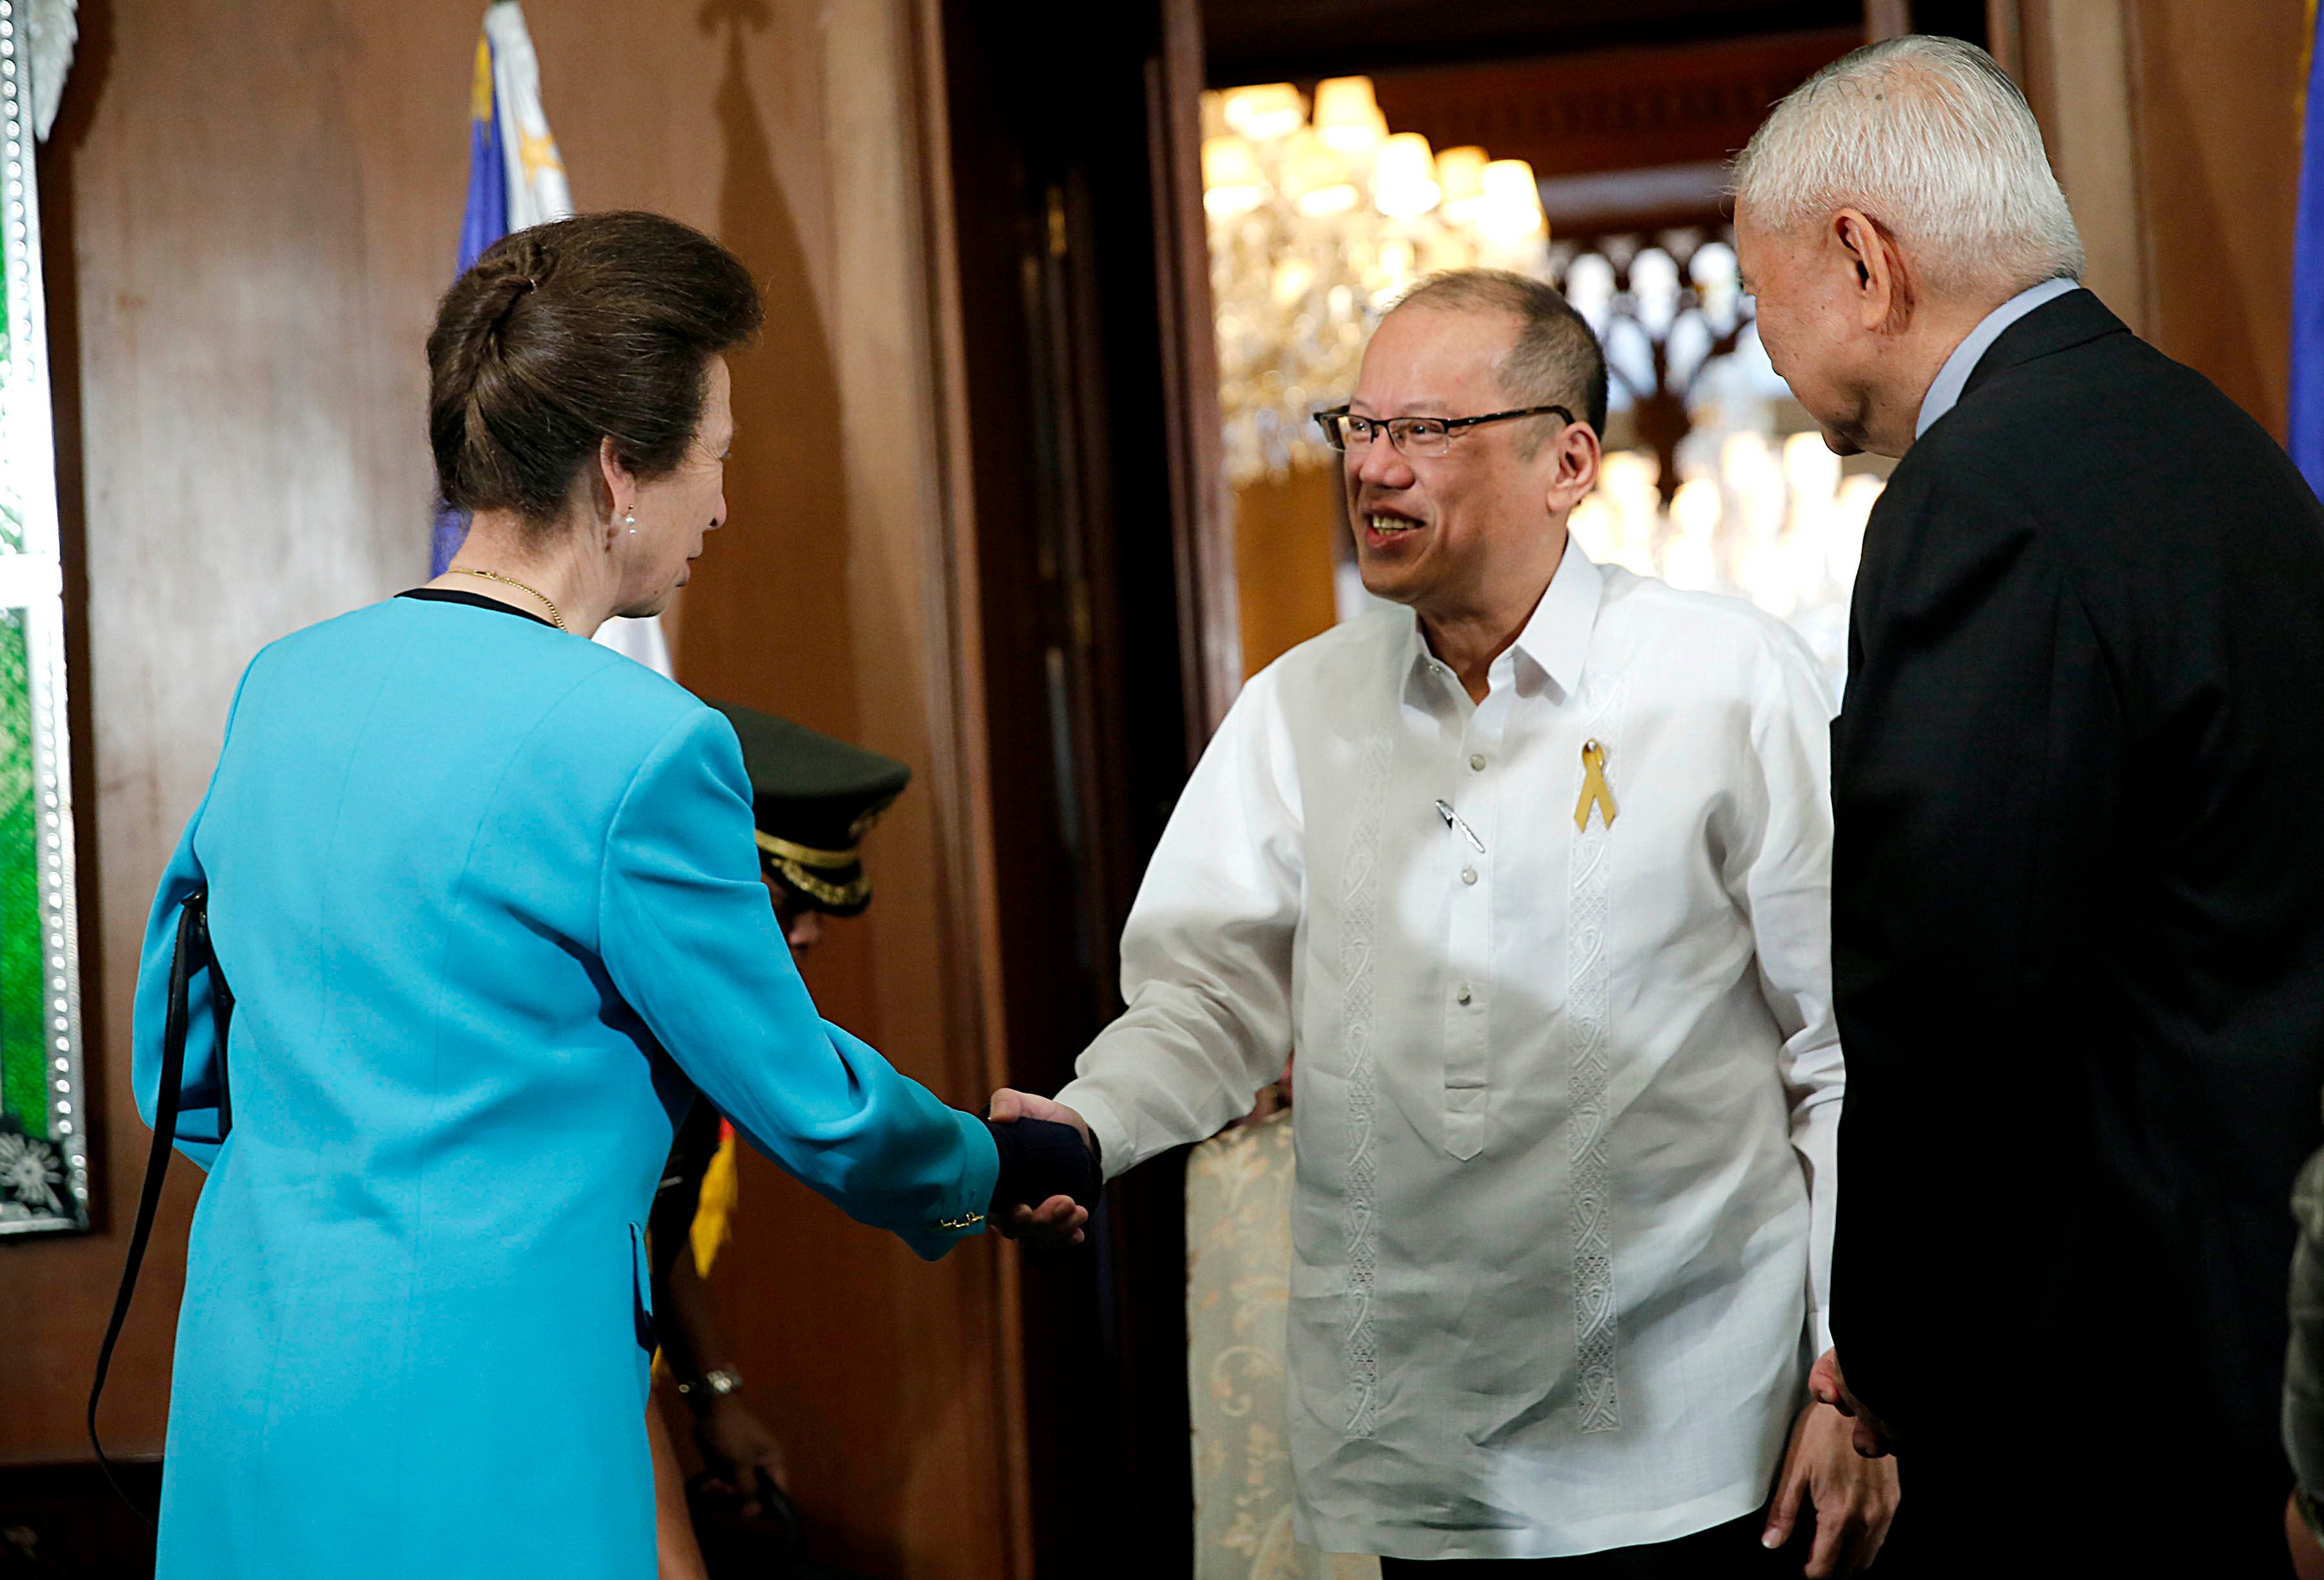 President Benigno S. Aquino III, with Foreign Secretary Albert del Rosario, welcomes Her Royal Highness Princess Anne, to Malacañang Palace on Tuesday, March 17, 2015. Photo by Gil Nartea/Malacañang Photo Bureau)     